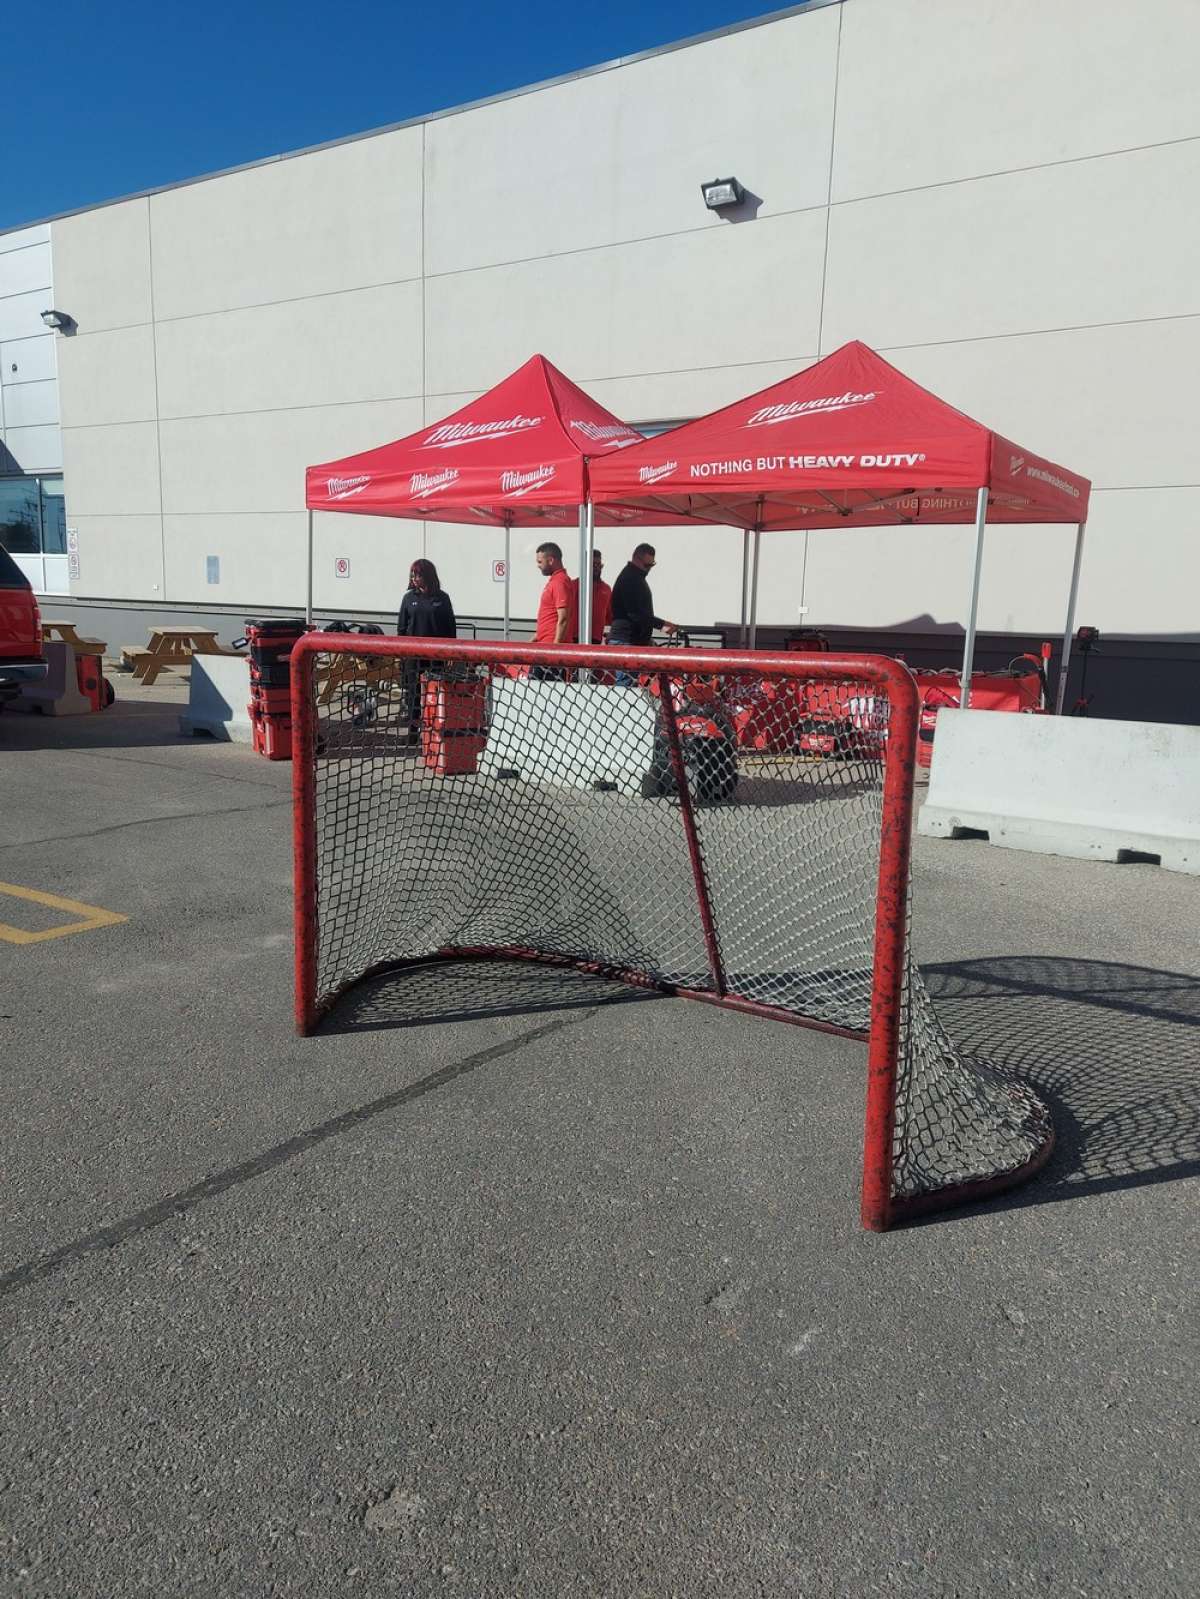 2021 - Tail Gate Party and Ball Hockey Tournament